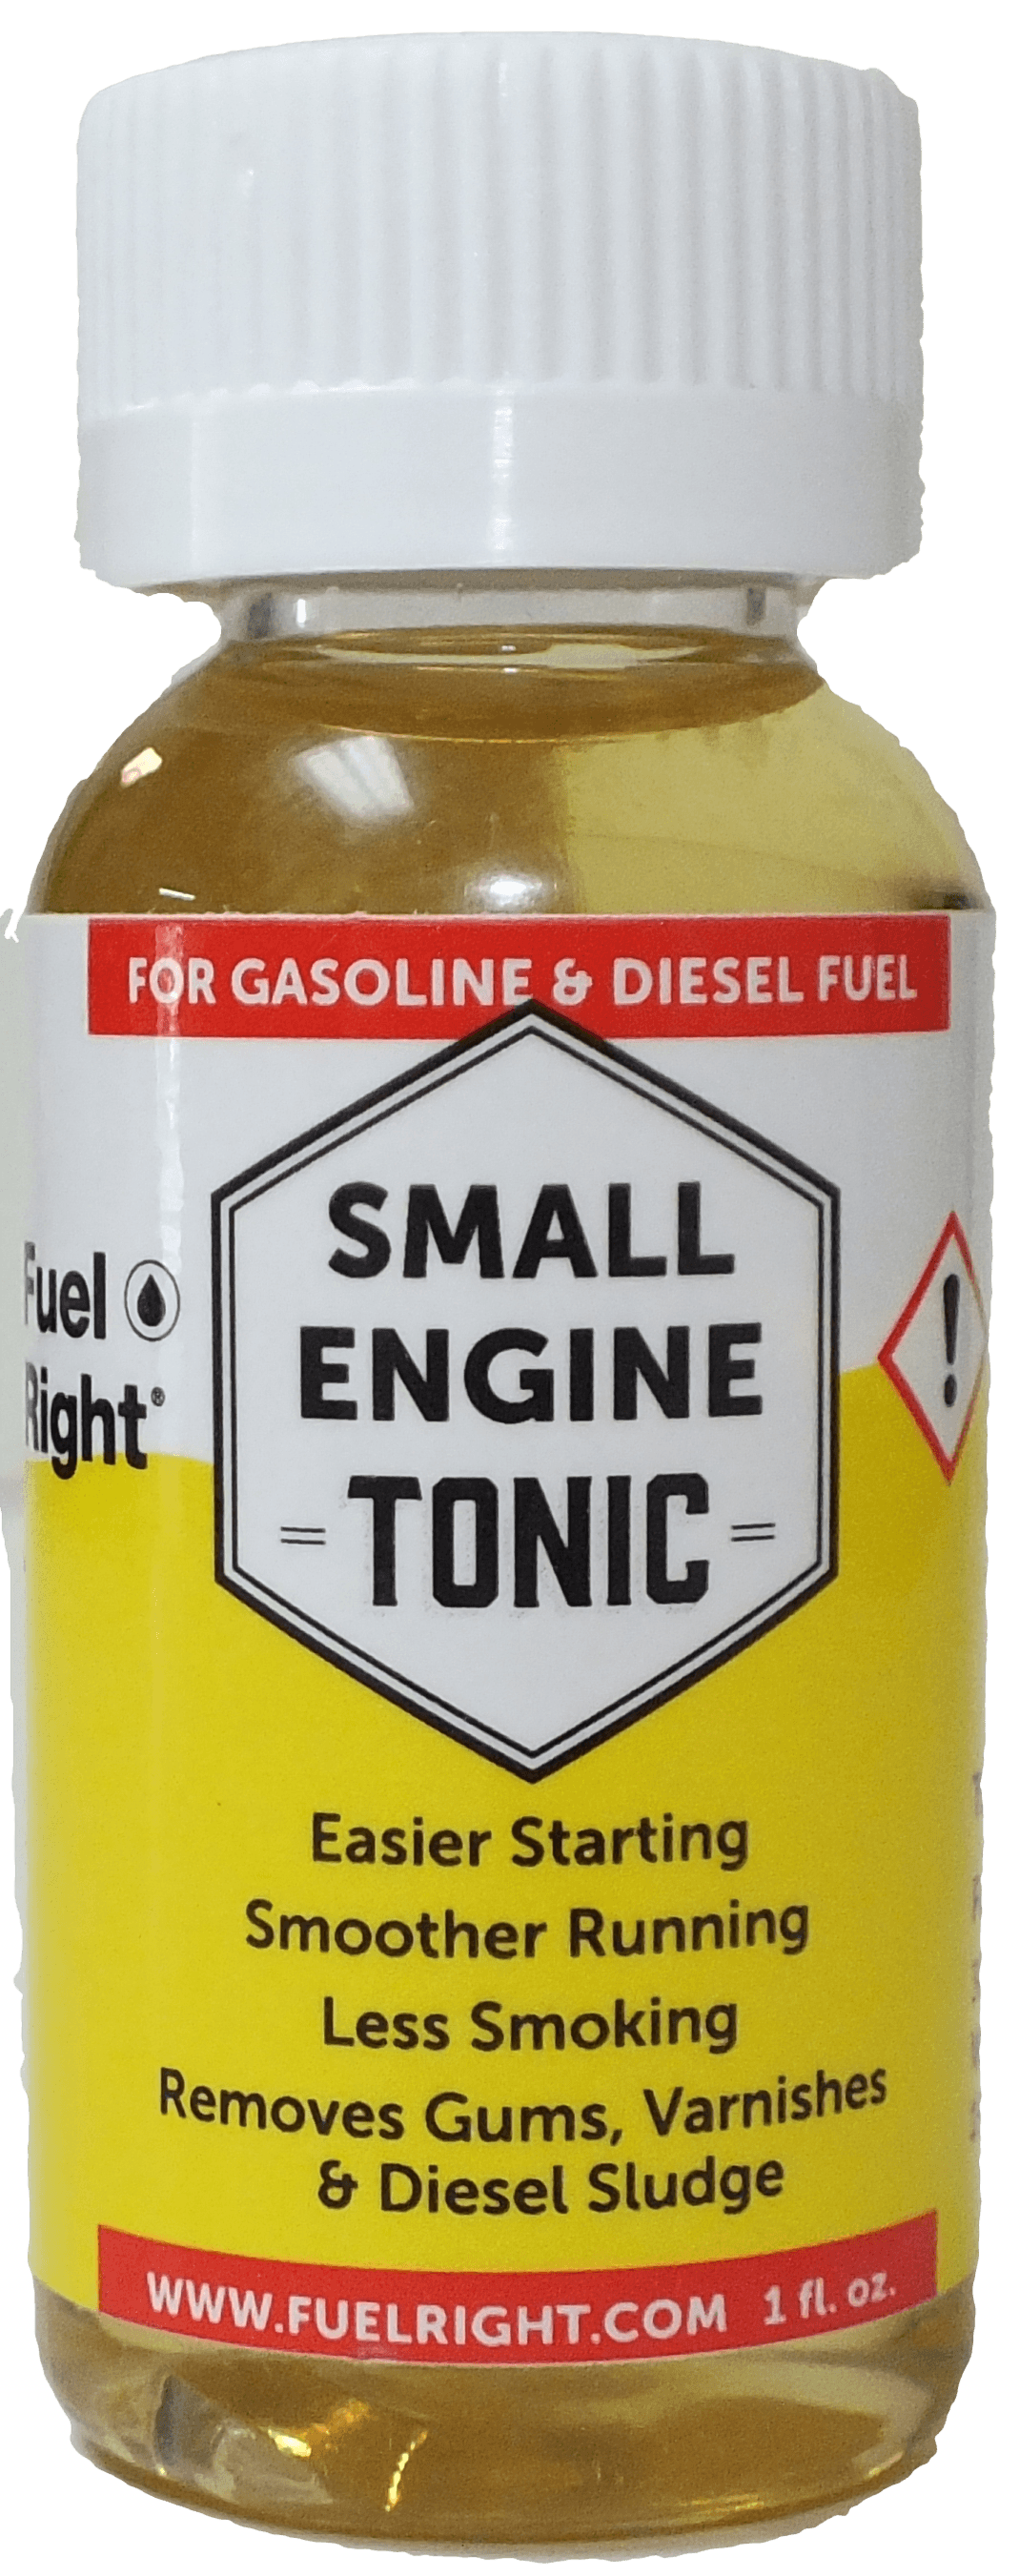 Fuel Right Small Engine Tonic